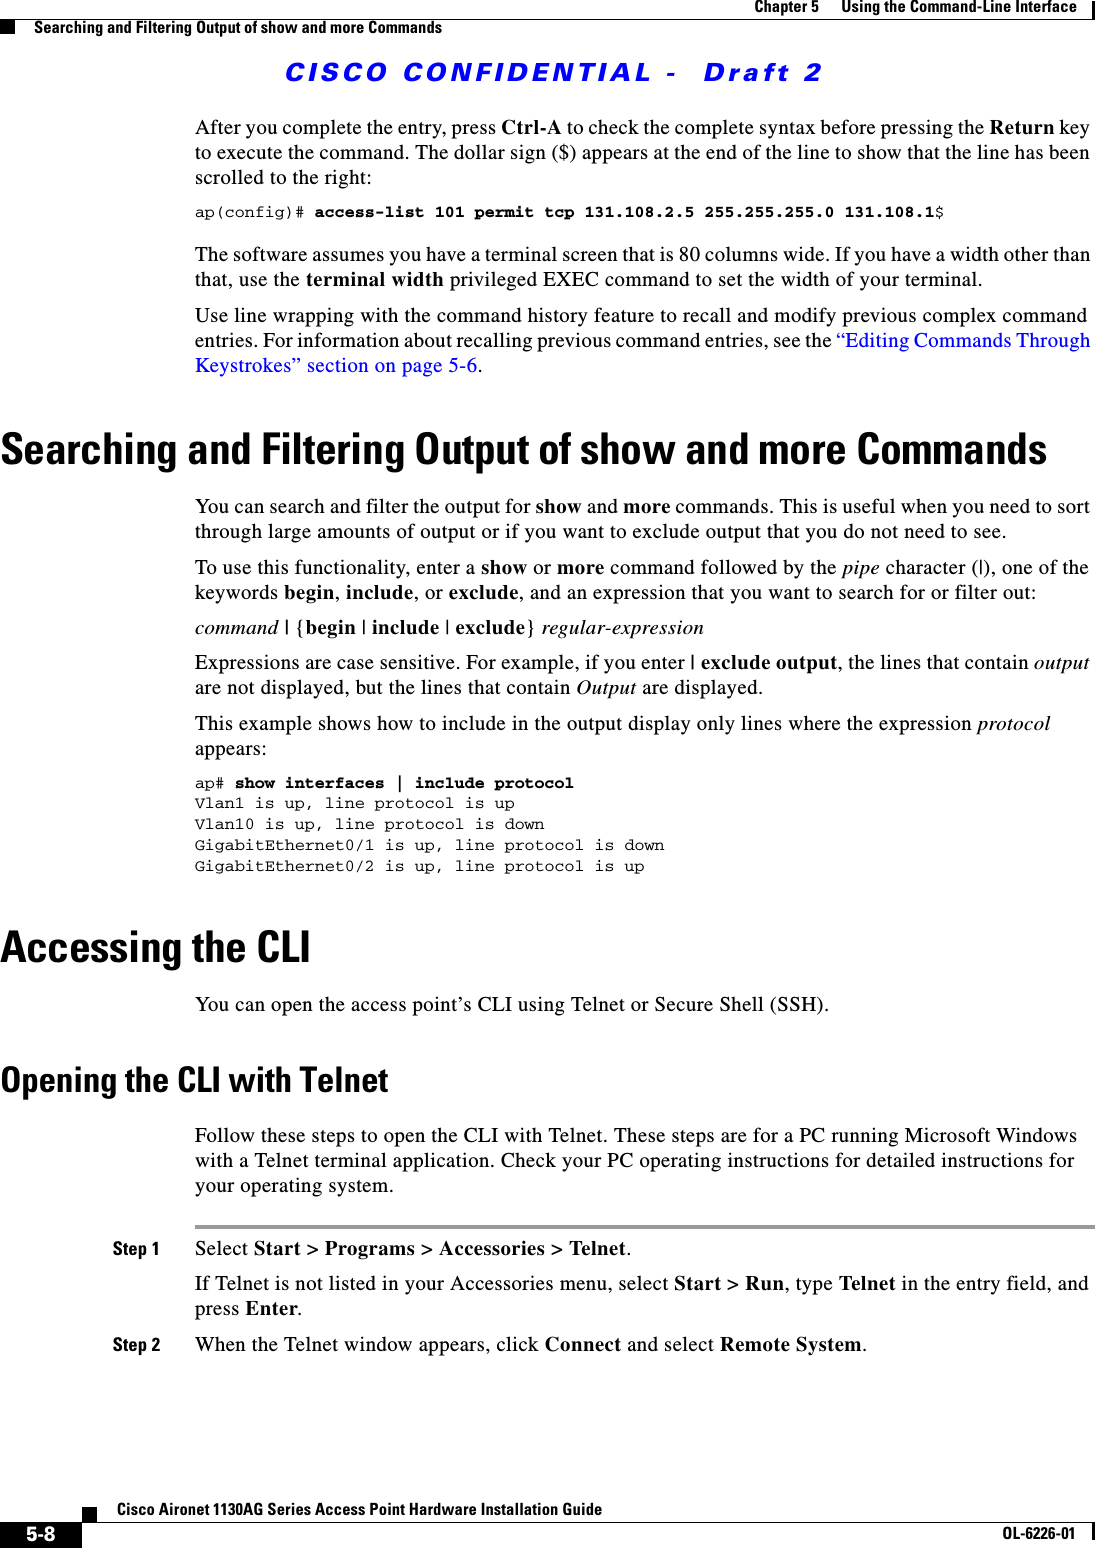  CISCO CONFIDENTIAL -  Draft 25-8Cisco Aironet 1130AG Series Access Point Hardware Installation GuideOL-6226-01Chapter 5      Using the Command-Line InterfaceSearching and Filtering Output of show and more CommandsAfter you complete the entry, press Ctrl-A to check the complete syntax before pressing the Return key to execute the command. The dollar sign ($) appears at the end of the line to show that the line has been scrolled to the right:ap(config)# access-list 101 permit tcp 131.108.2.5 255.255.255.0 131.108.1$The software assumes you have a terminal screen that is 80 columns wide. If you have a width other than that, use the terminal width privileged EXEC command to set the width of your terminal.Use line wrapping with the command history feature to recall and modify previous complex command entries. For information about recalling previous command entries, see the “Editing Commands Through Keystrokes” section on page 5-6.Searching and Filtering Output of show and more CommandsYou can search and filter the output for show and more commands. This is useful when you need to sort through large amounts of output or if you want to exclude output that you do not need to see.To use this functionality, enter a show or more command followed by the pipe character (|), one of the keywords begin, include, or exclude, and an expression that you want to search for or filter out:command | {begin | include | exclude} regular-expressionExpressions are case sensitive. For example, if you enter | exclude output, the lines that contain output are not displayed, but the lines that contain Output are displayed.This example shows how to include in the output display only lines where the expression protocol appears:ap# show interfaces | include protocolVlan1 is up, line protocol is upVlan10 is up, line protocol is downGigabitEthernet0/1 is up, line protocol is downGigabitEthernet0/2 is up, line protocol is up Accessing the CLIYou can open the access point’s CLI using Telnet or Secure Shell (SSH). Opening the CLI with TelnetFollow these steps to open the CLI with Telnet. These steps are for a PC running Microsoft Windows with a Telnet terminal application. Check your PC operating instructions for detailed instructions for your operating system.Step 1 Select Start &gt; Programs &gt; Accessories &gt; Telnet. If Telnet is not listed in your Accessories menu, select Start &gt; Run, type Telnet in the entry field, and press Enter. Step 2 When the Telnet window appears, click Connect and select Remote System.